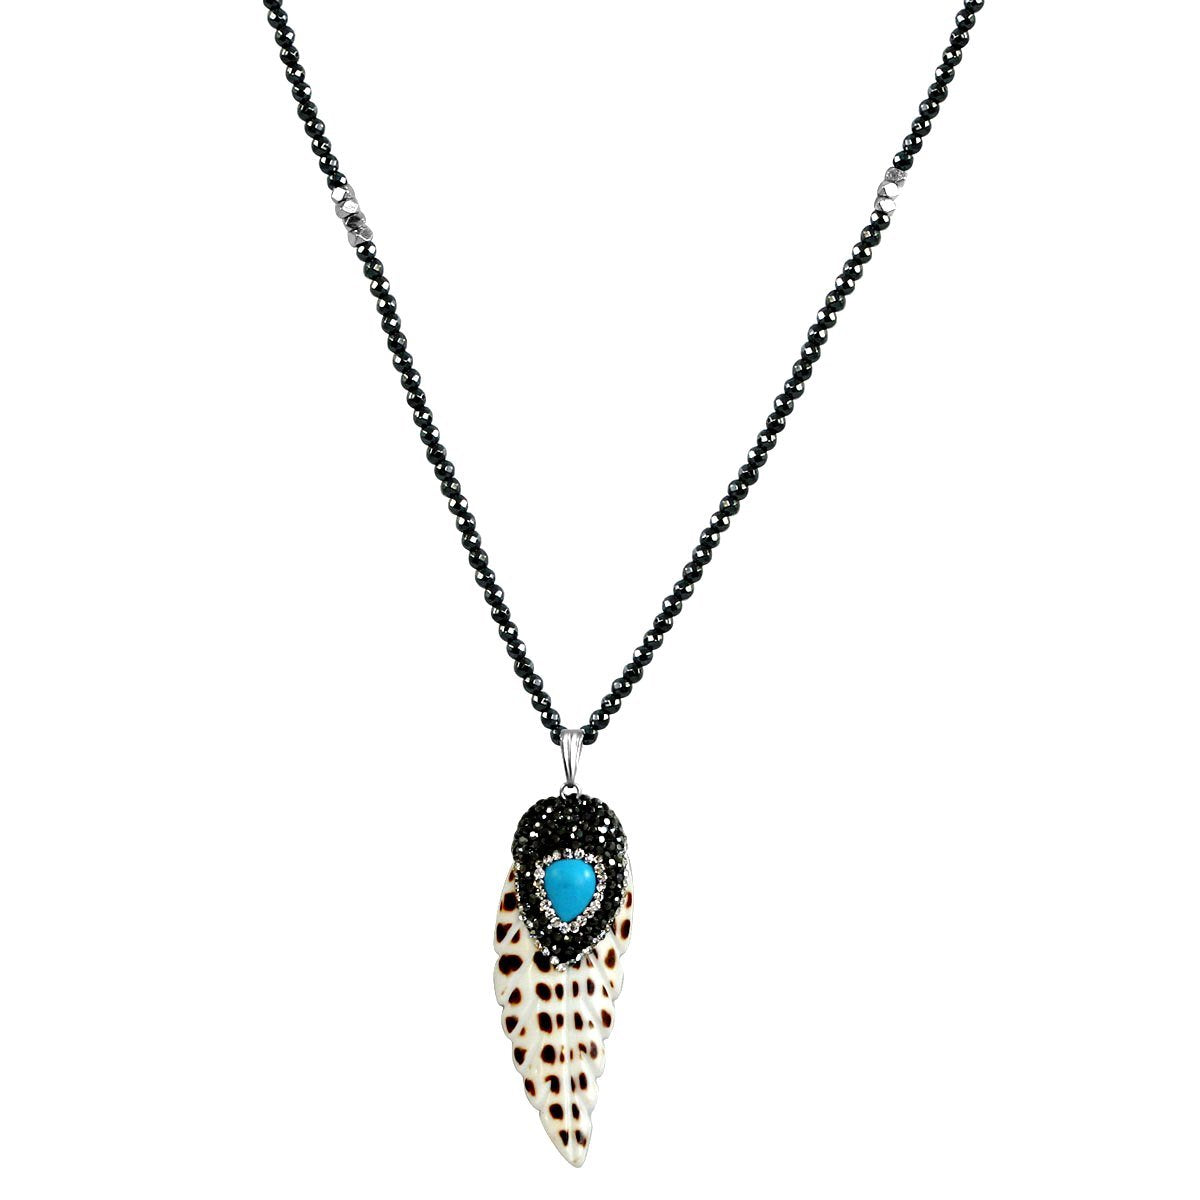 Boho with a Modern Twist Jeweled Feather Pendant with Turquise Comes with 30" dark Faceted Hematite Beads 696N3591